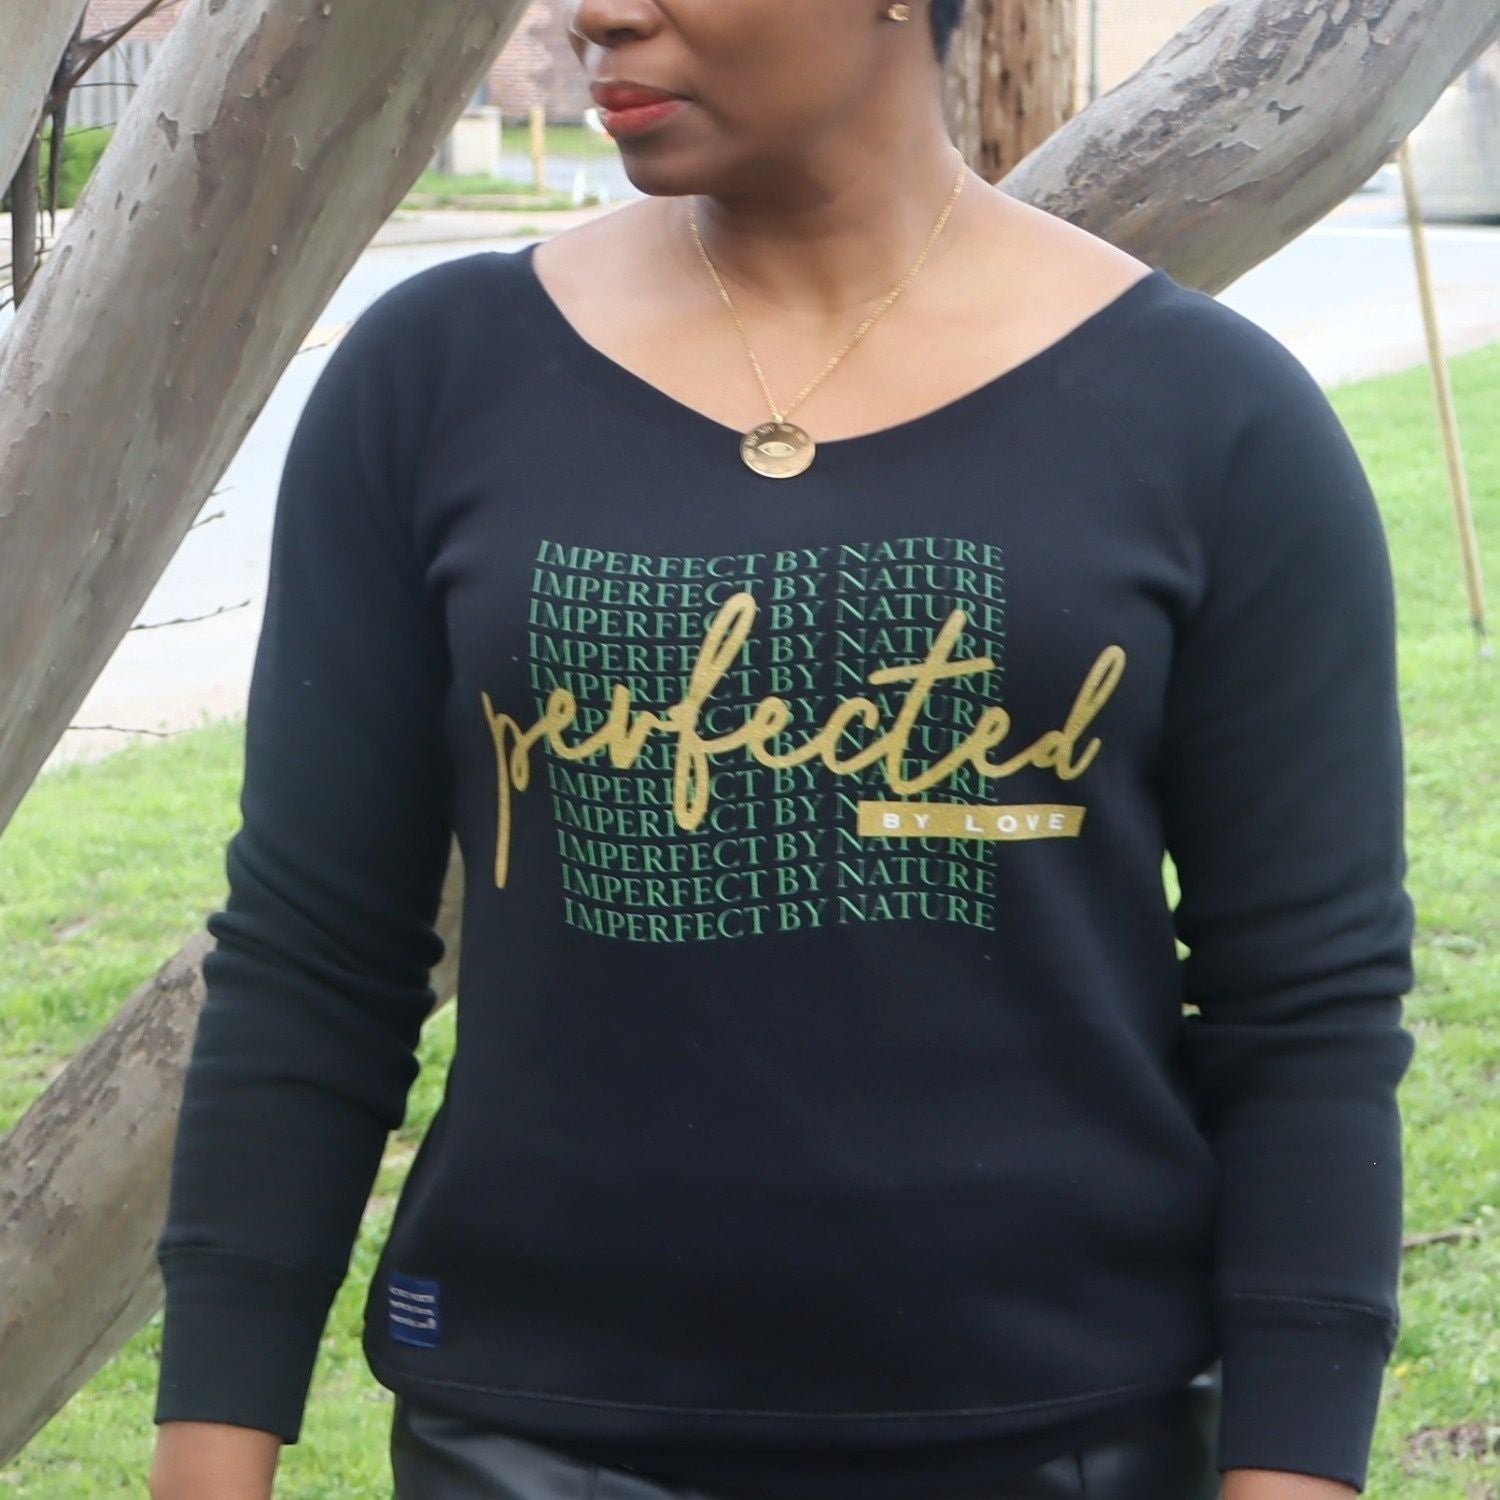 Perfected by Love Sweater style